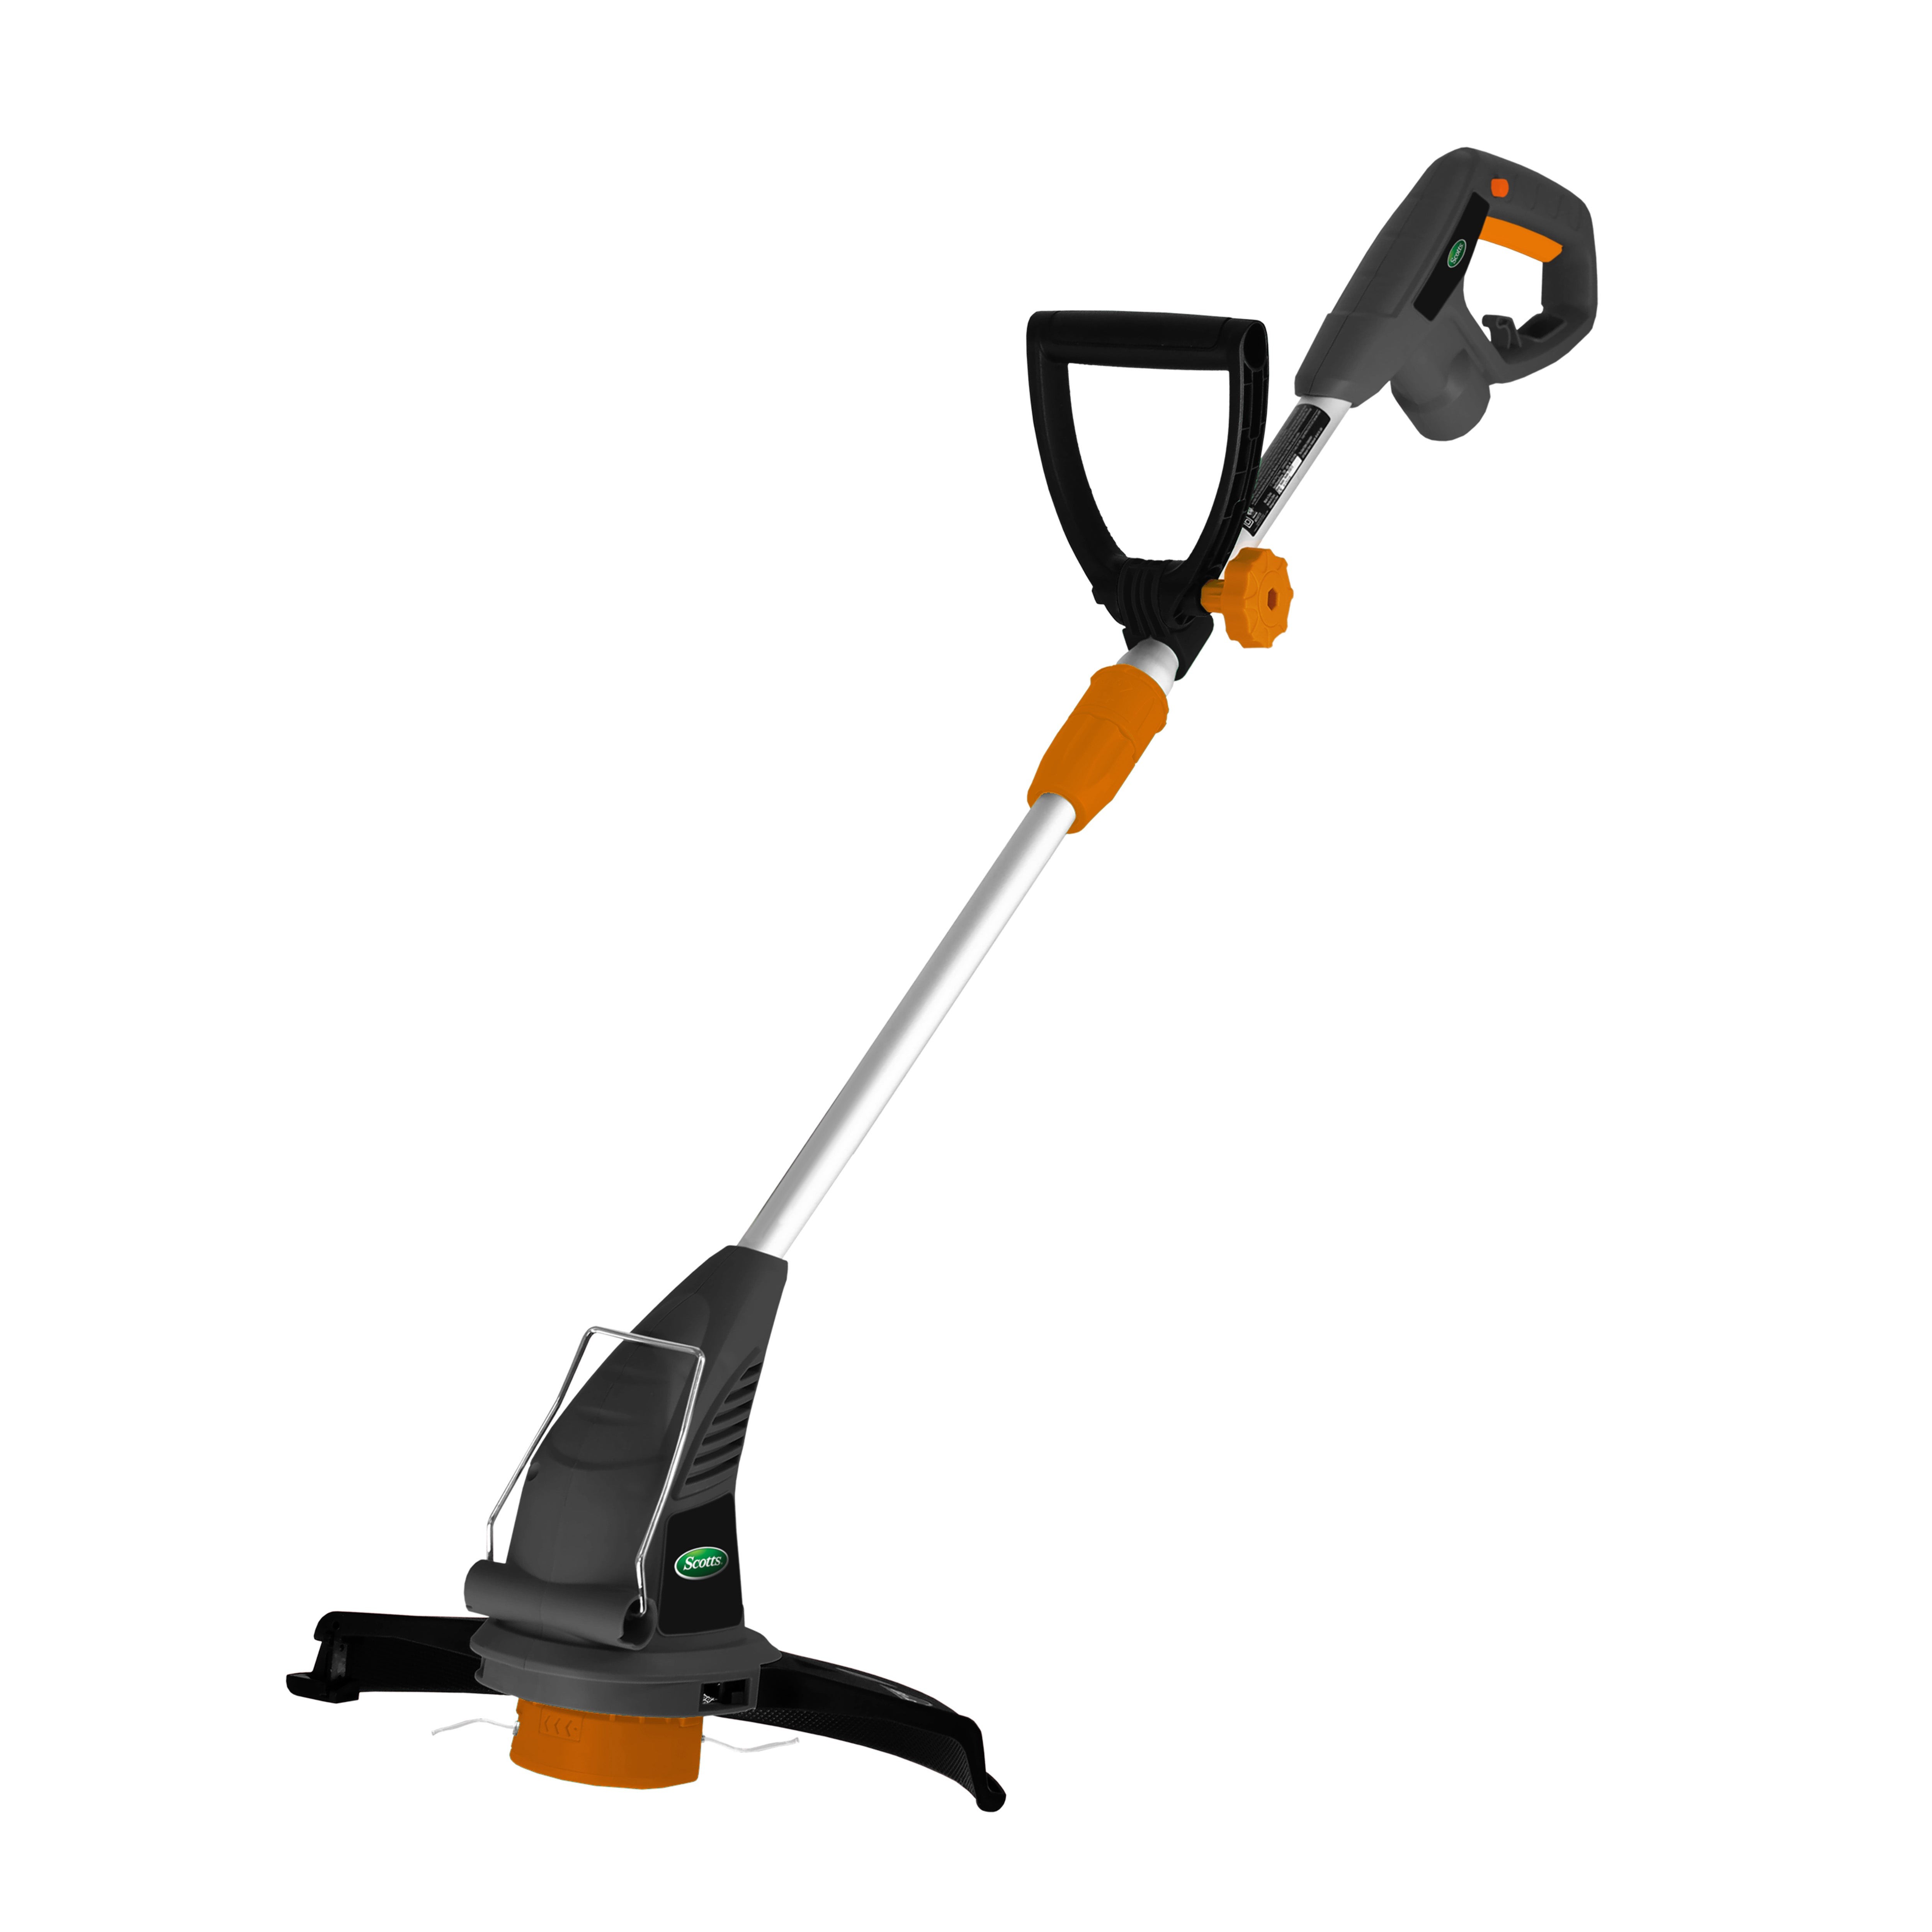 13" Corded Electric String Trimmer